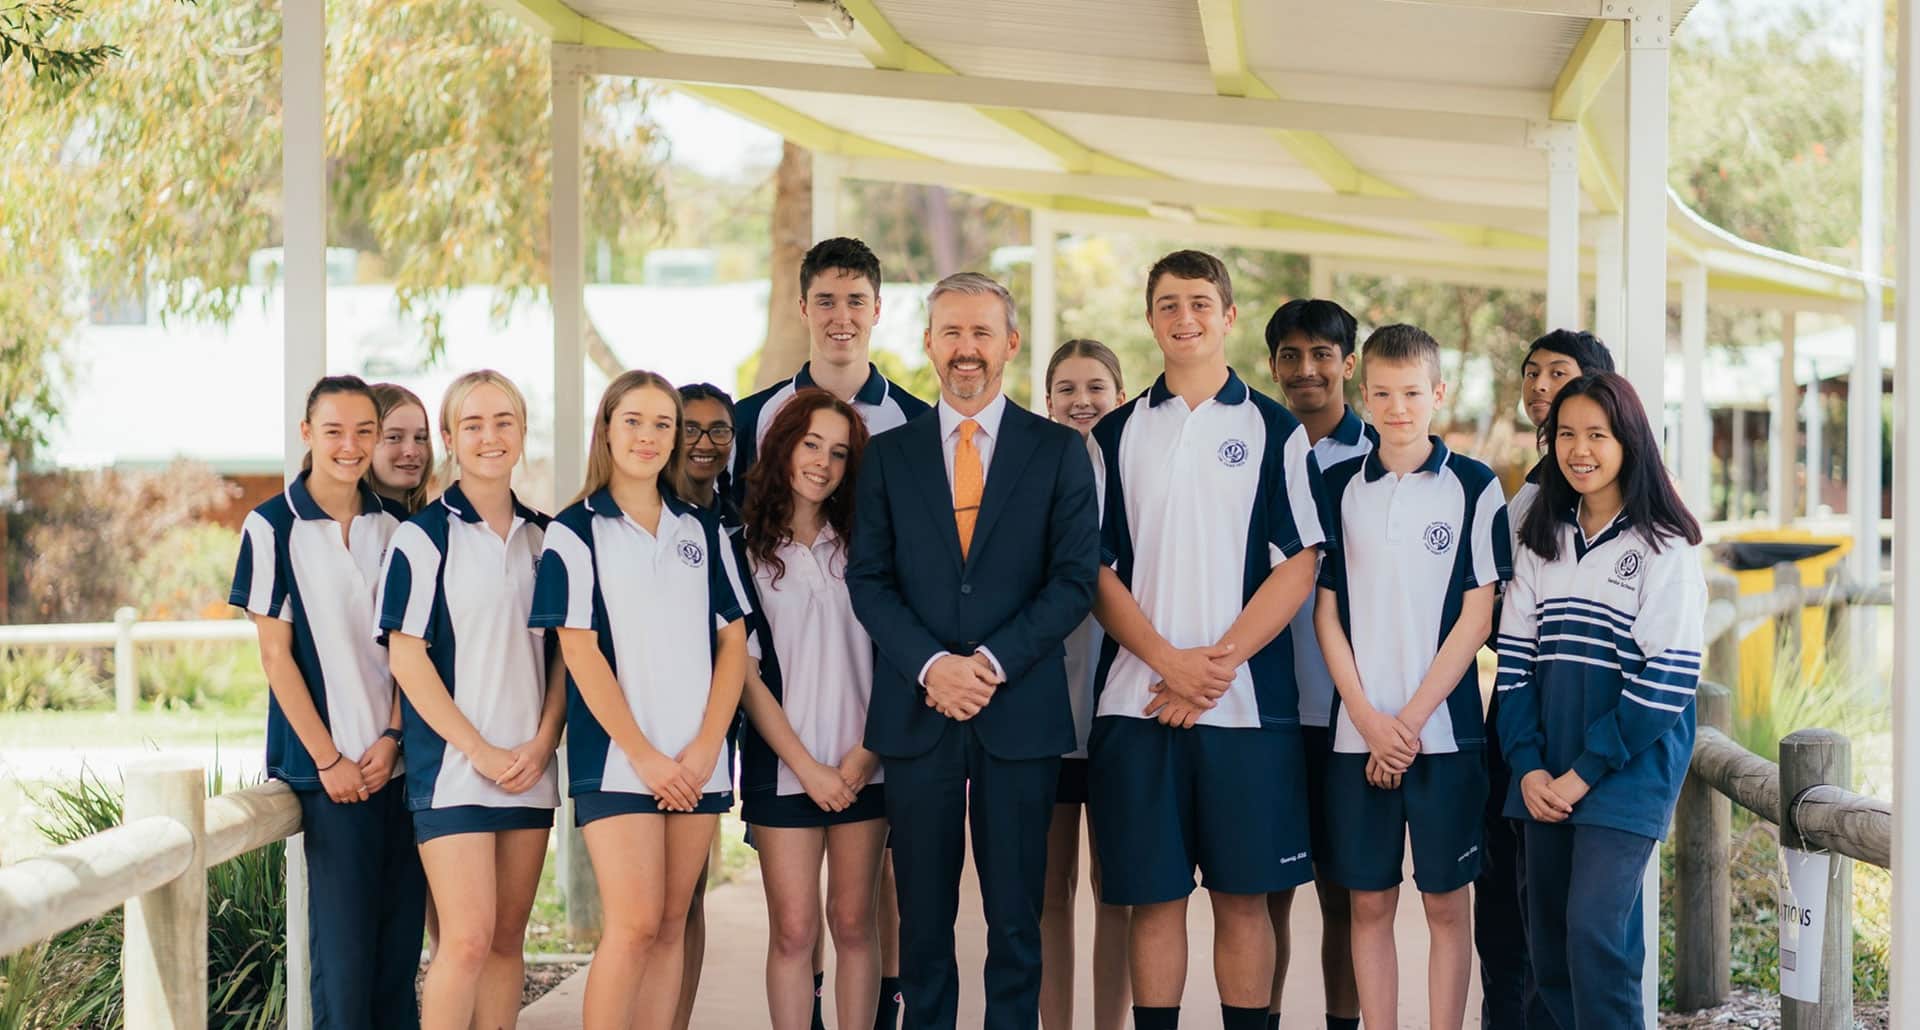 Duncraig Senior High School Principal, Peter Lillywhite stands with a group of students.